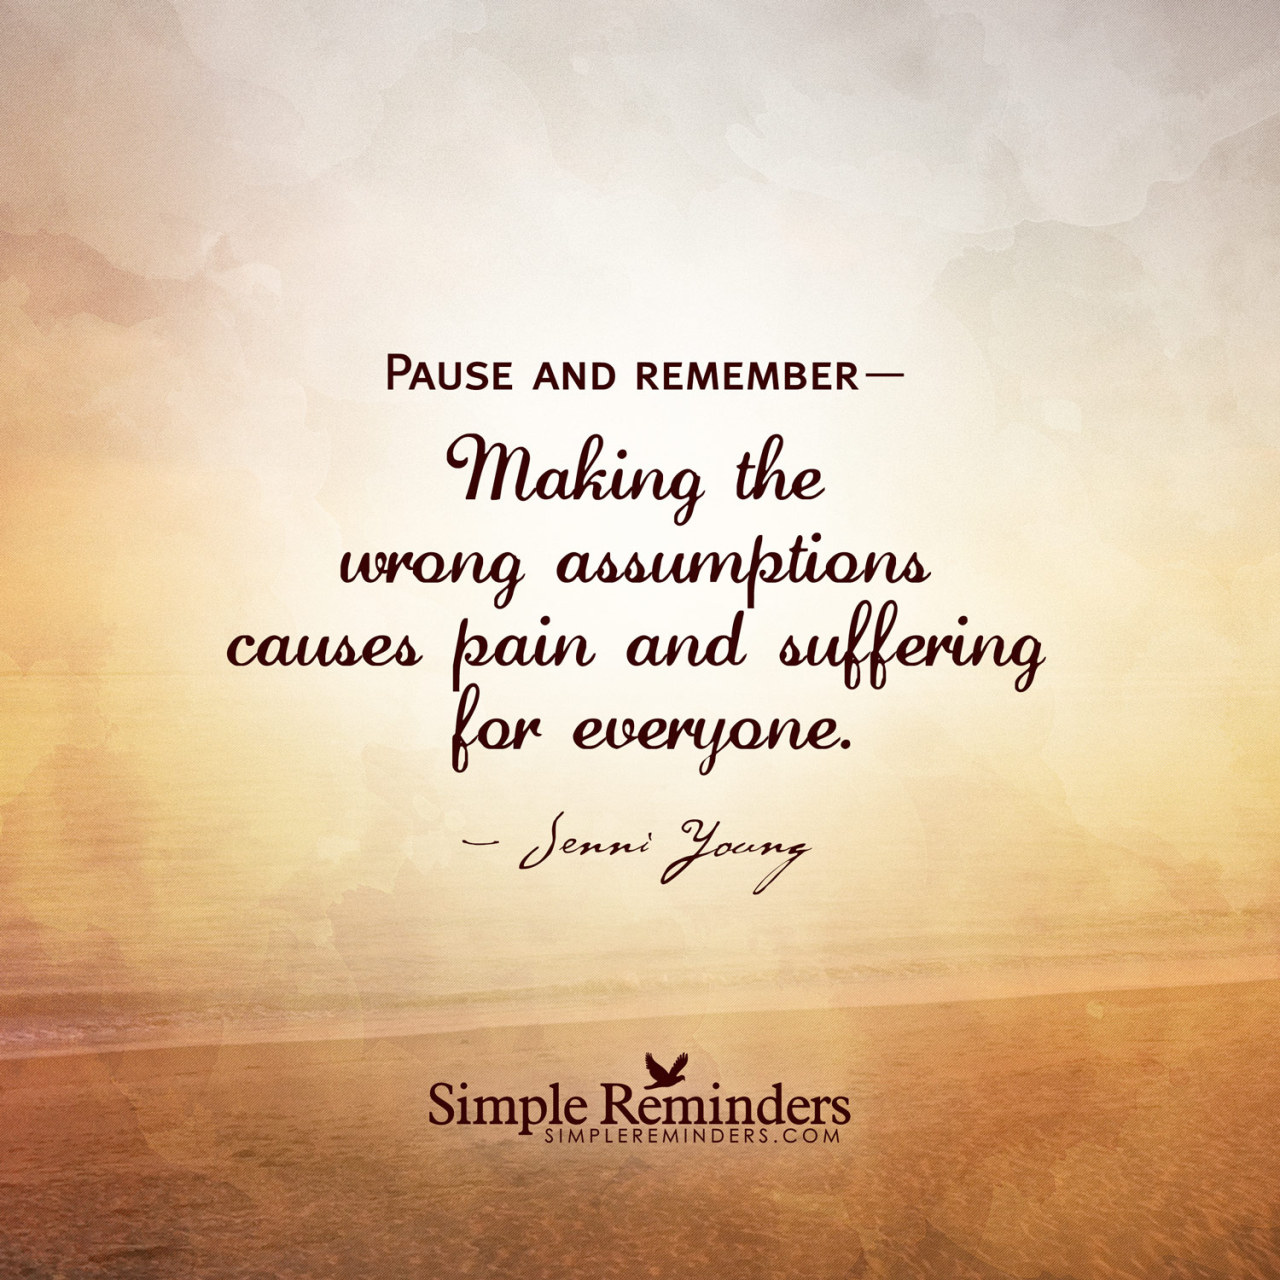 mysimplereminders:  &ldquo;Pause and remember— Making the wrong assumptions